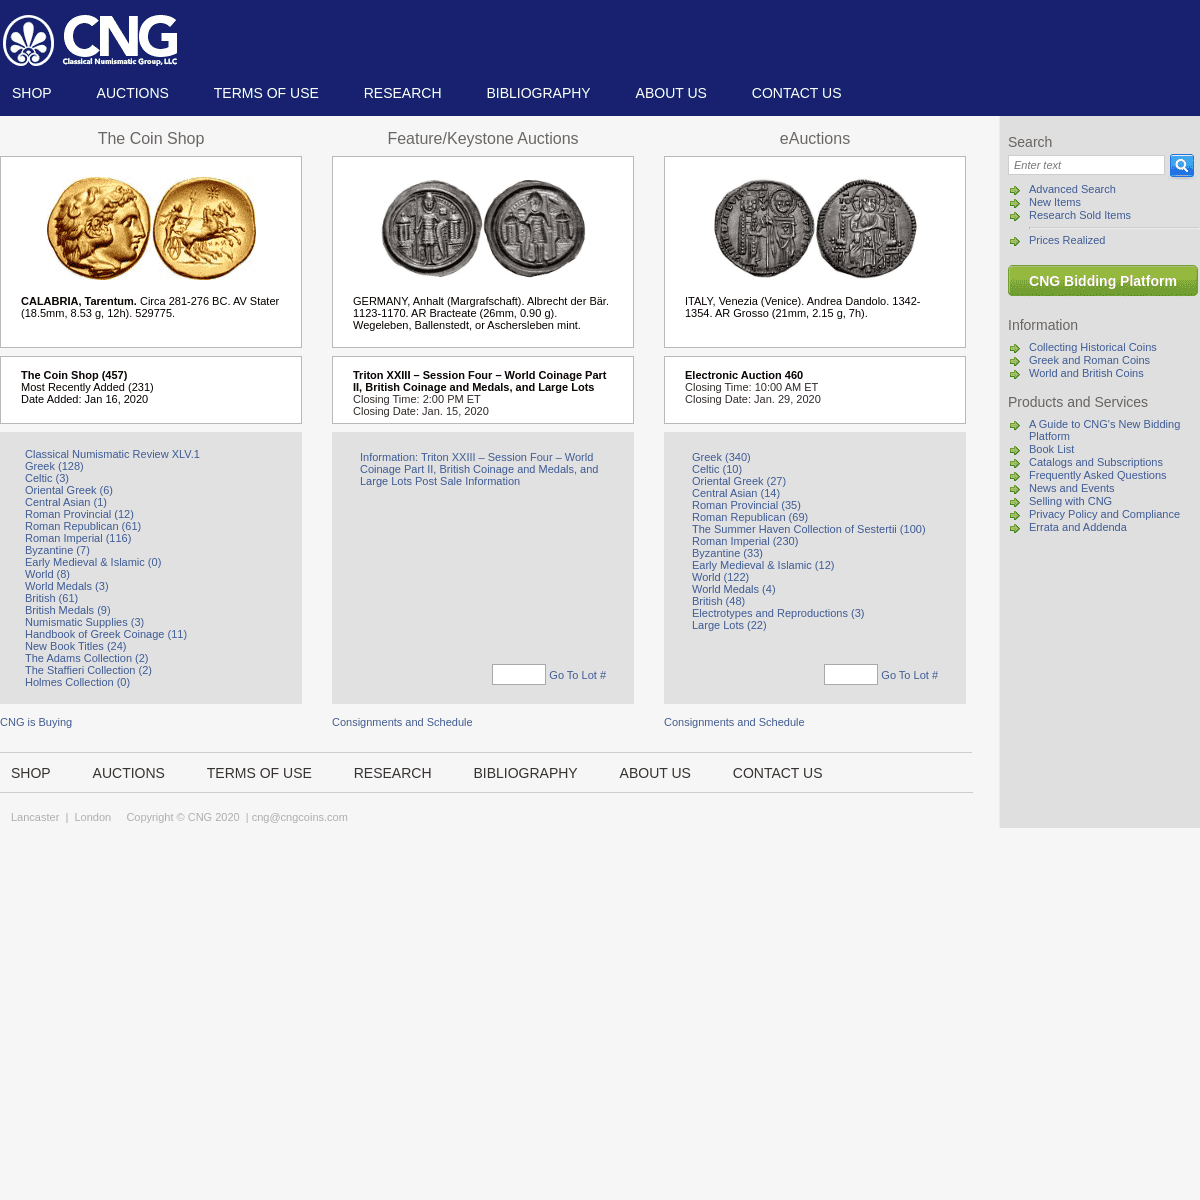 A complete backup of cngcoins.com